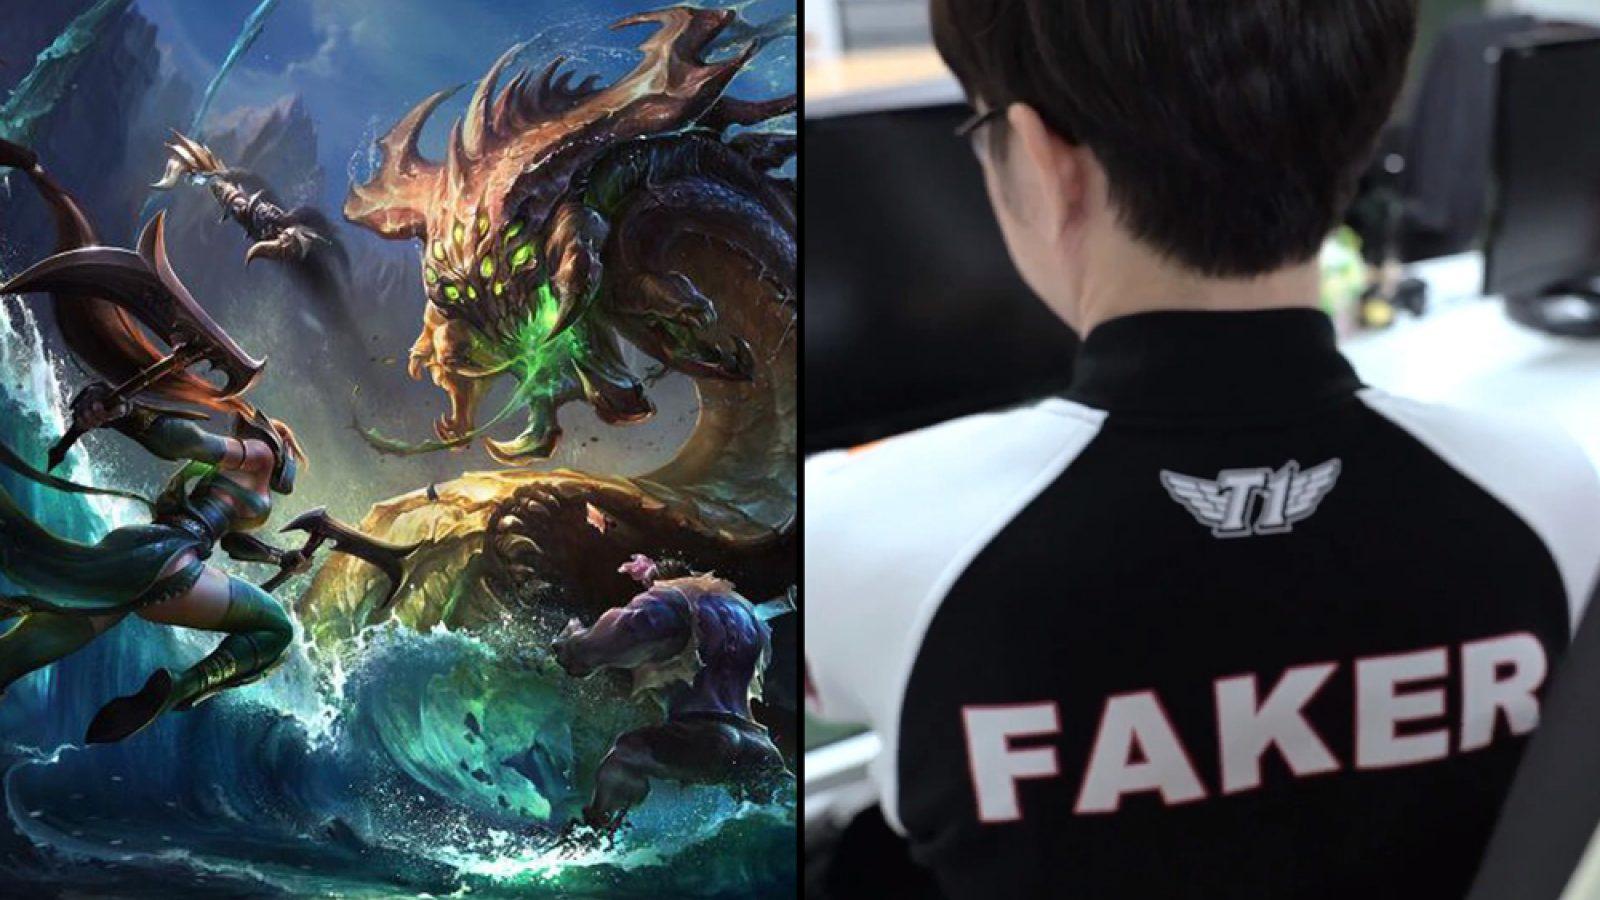 Top gaming tips from LoL legend Faker